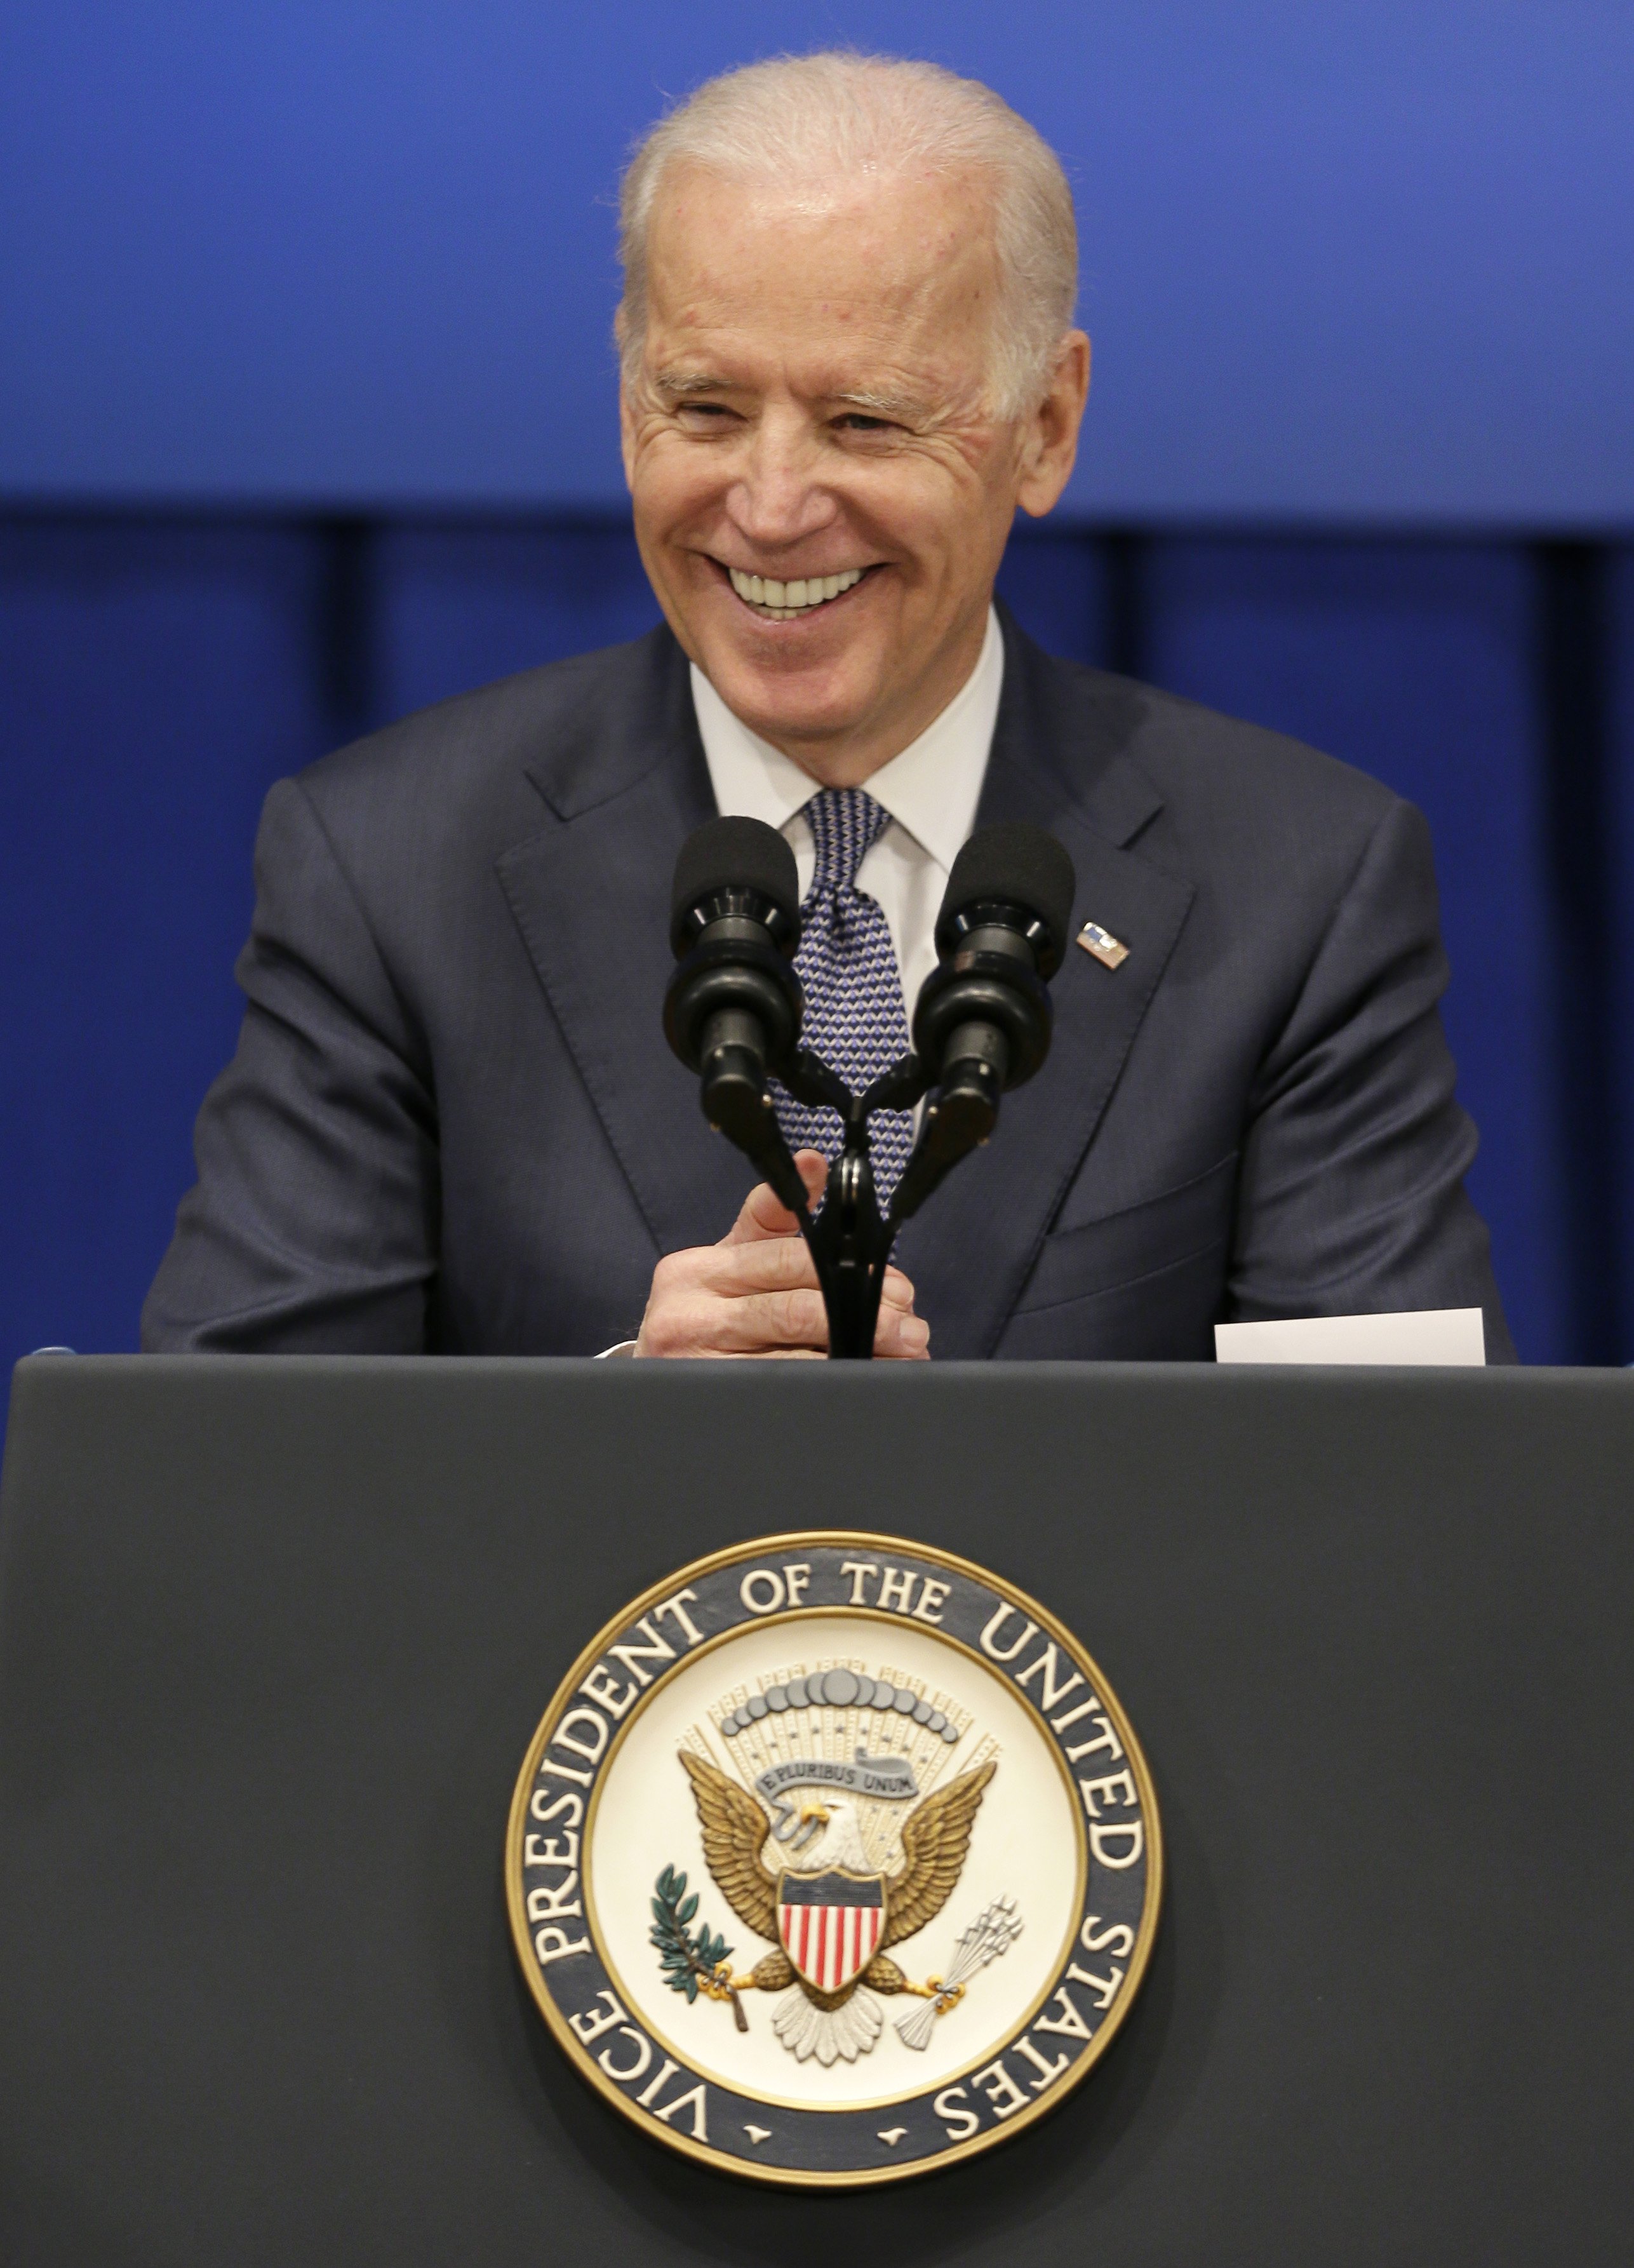 Vice President Joe Biden smiles as he speaks about the economy and the Obama administration's policies on Feb. 12, 2015, at Drake University in Des Moines, Iowa. (Charlie Neibergall—AP)